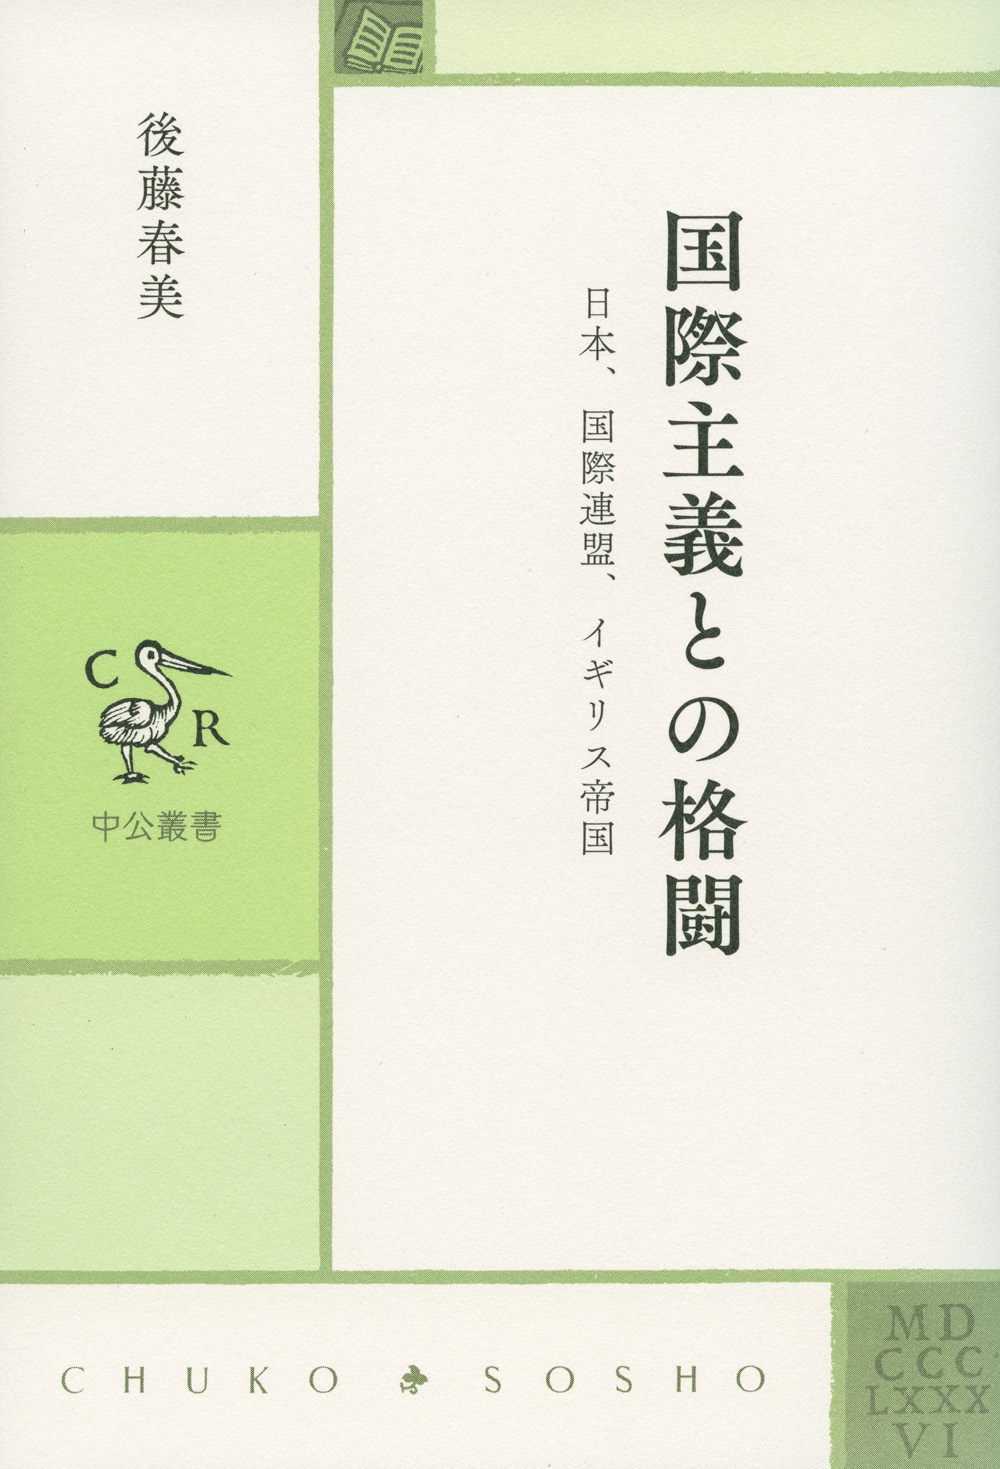 Book title, publisher, and author name separated by borders in bright green on pale golden-yellow cover